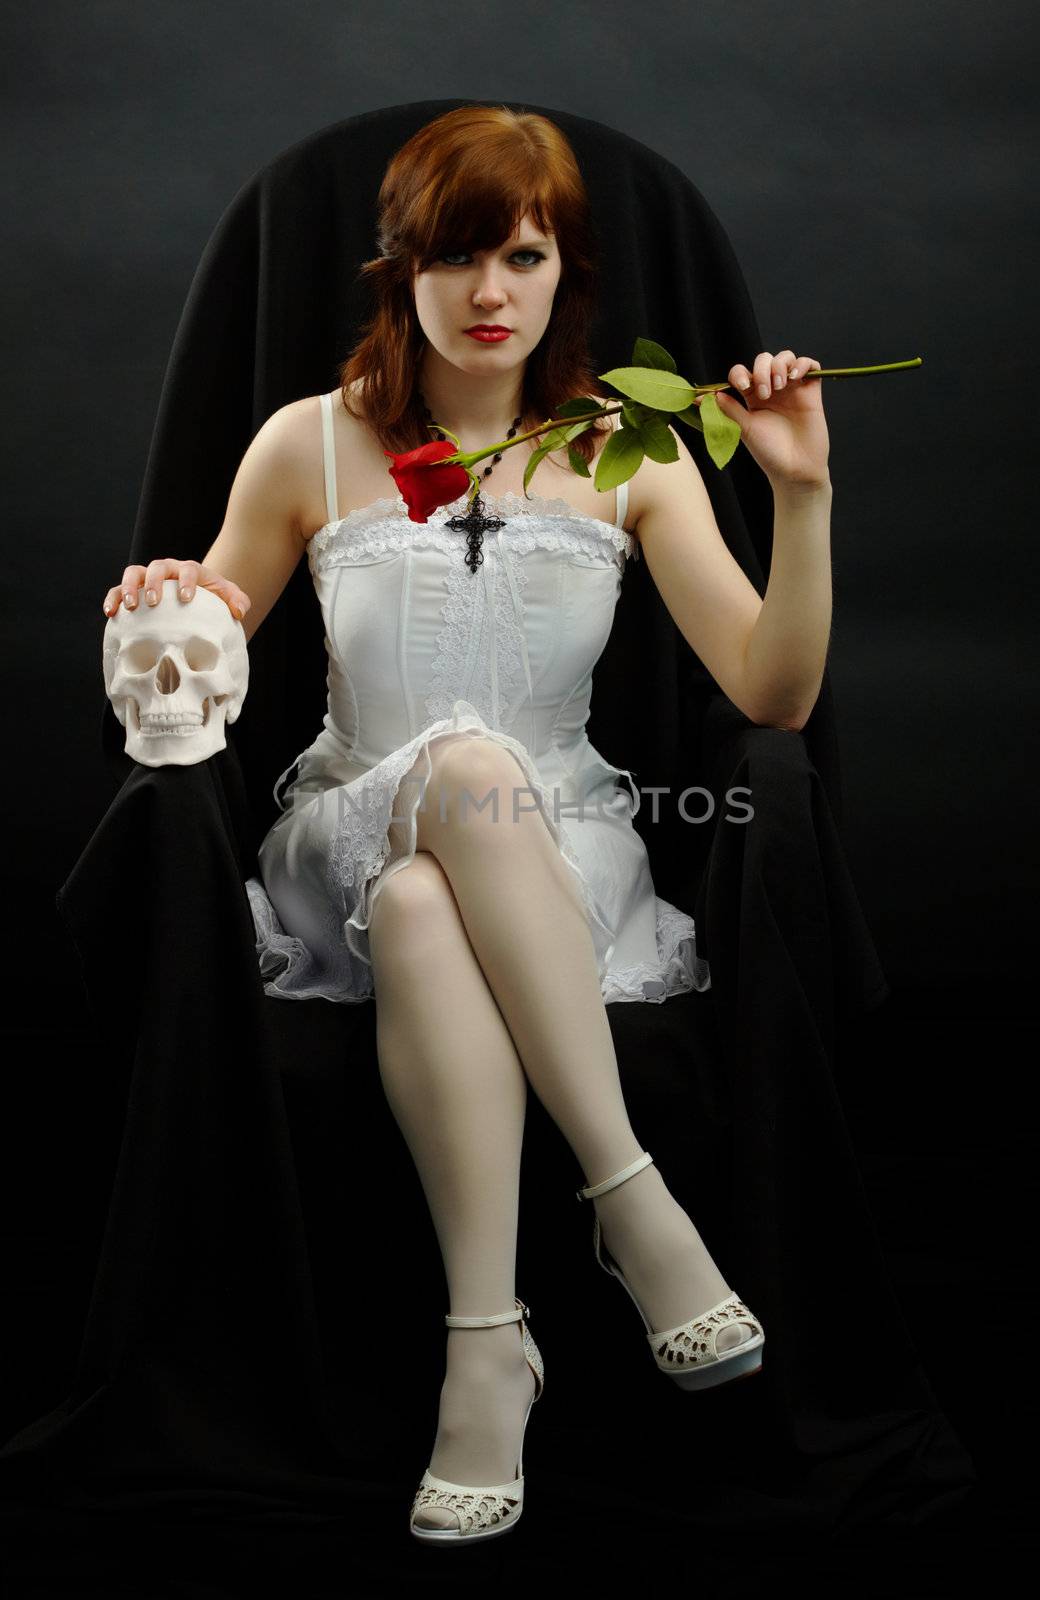 A young girl sits in a black chair with a rose and skull